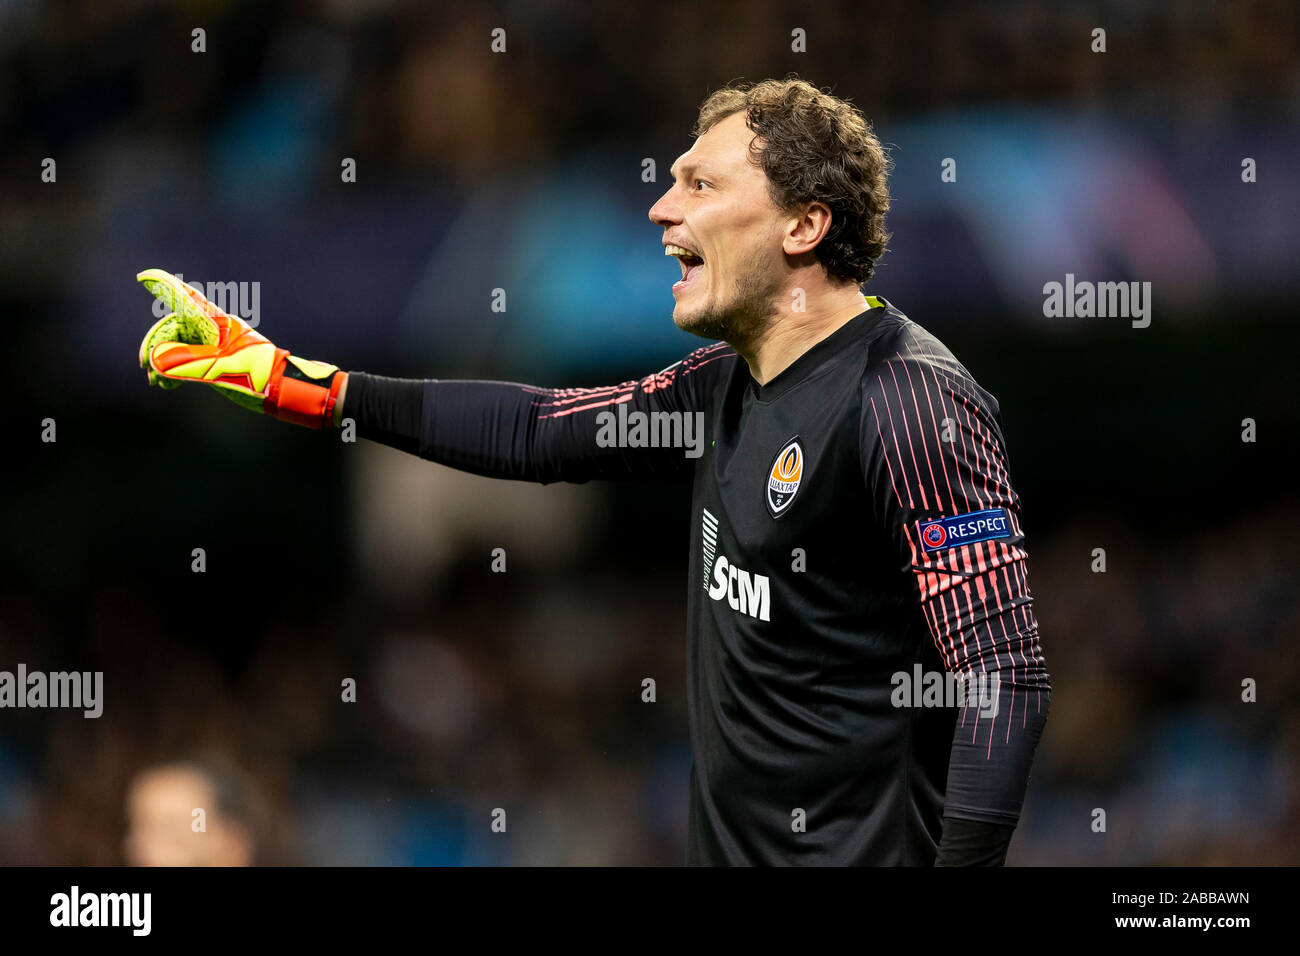 Manchester, UK. 26th Nov, 2019. Andriy Pyatov of Shakhtar Donetsk during the UEFA Champions League Group C match between Manchester City and Shakhtar Donetsk at the Etihad Stadium on November 26th 2019 in Manchester, England. (Photo by Daniel Chesterton/phcimages.com) Credit: PHC Images/Alamy Live News Stock Photo